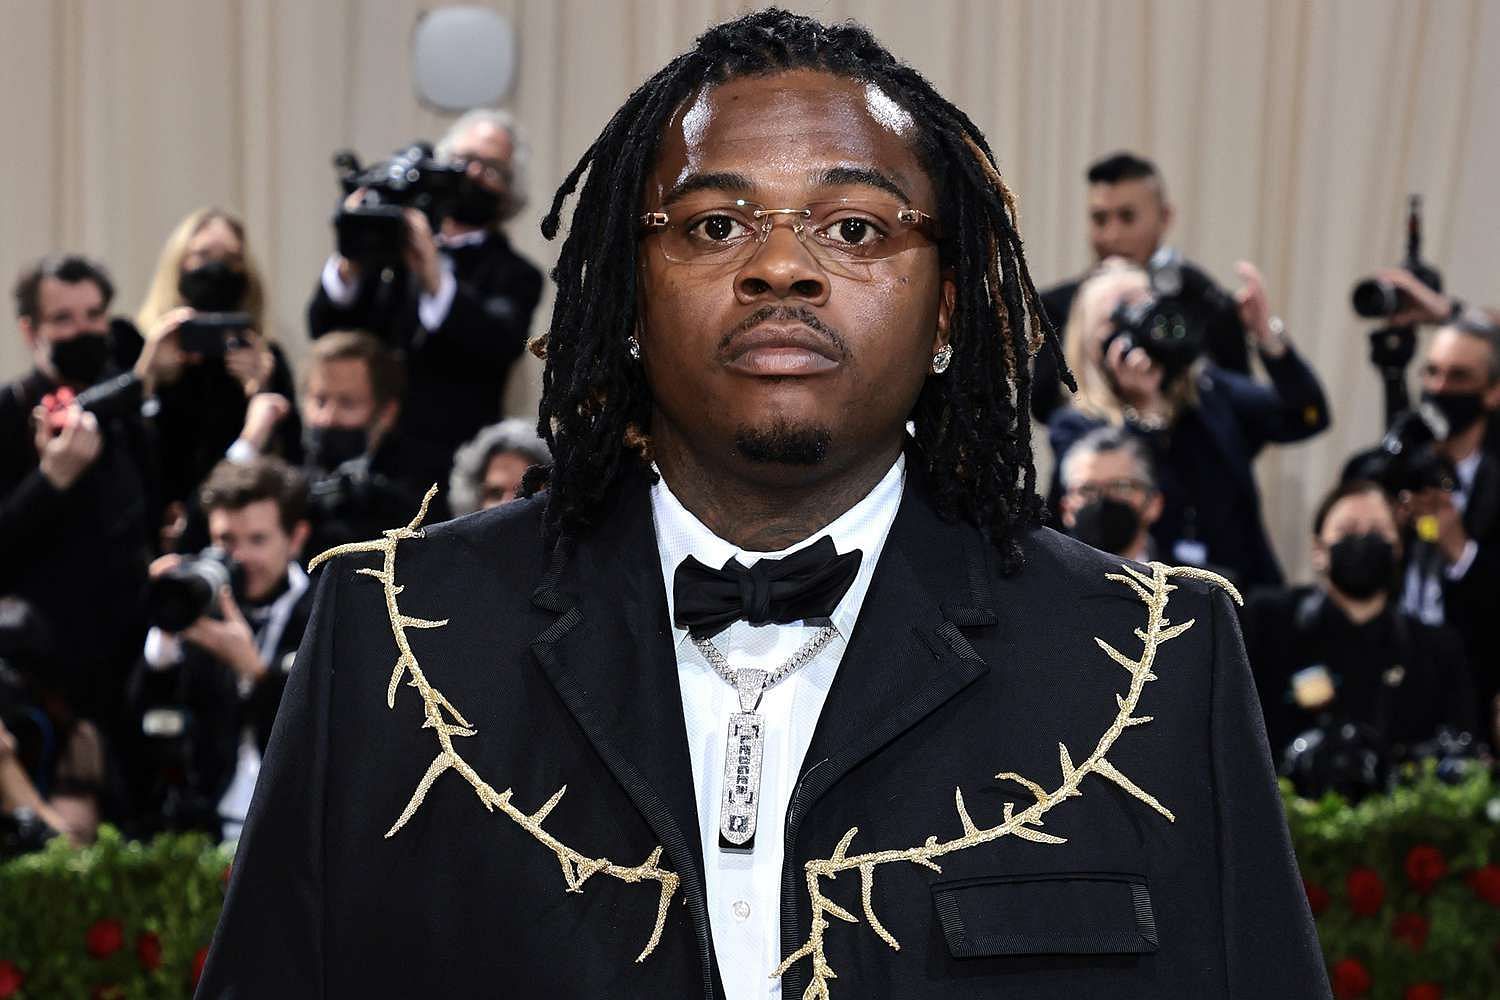 Gunna has maintained a relation with the NBA and its stars